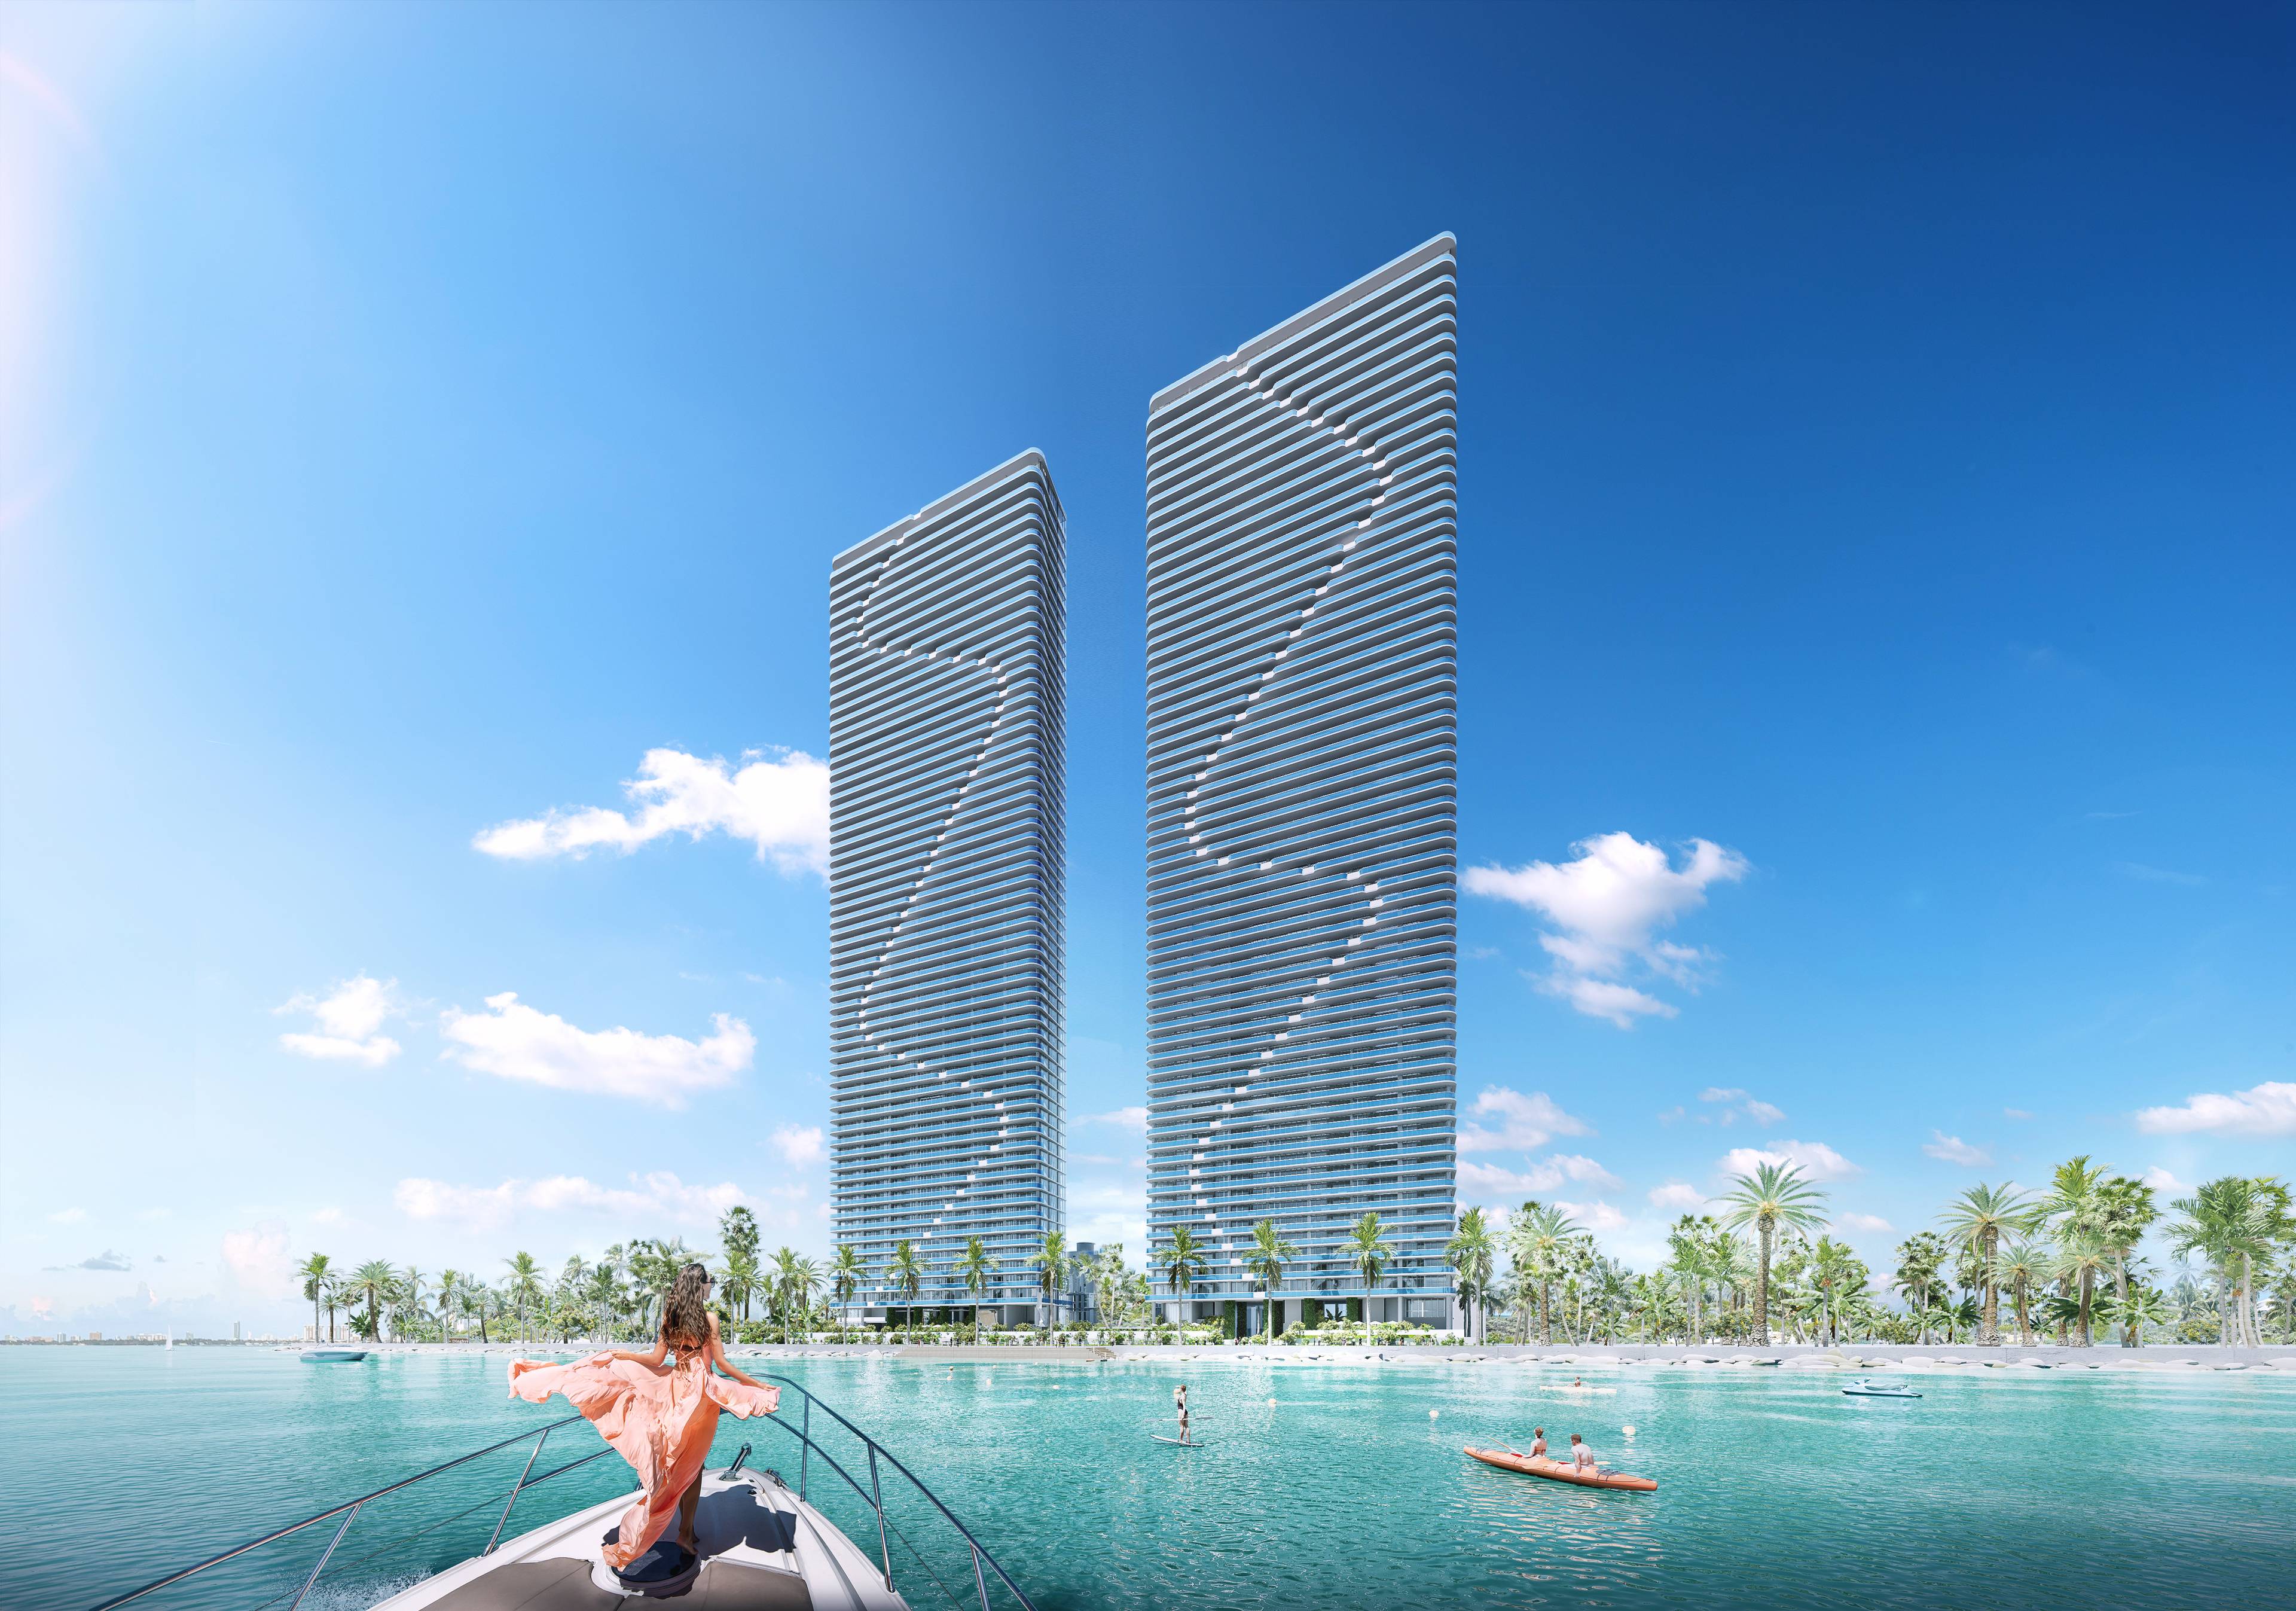 MIAMI WATERFRONT CONDO | TALLEST TWIN TOWERS IN THE US | WATER VIEWS, PARKING, TERRACE | 2 BED + OFFICE, 3 BATH